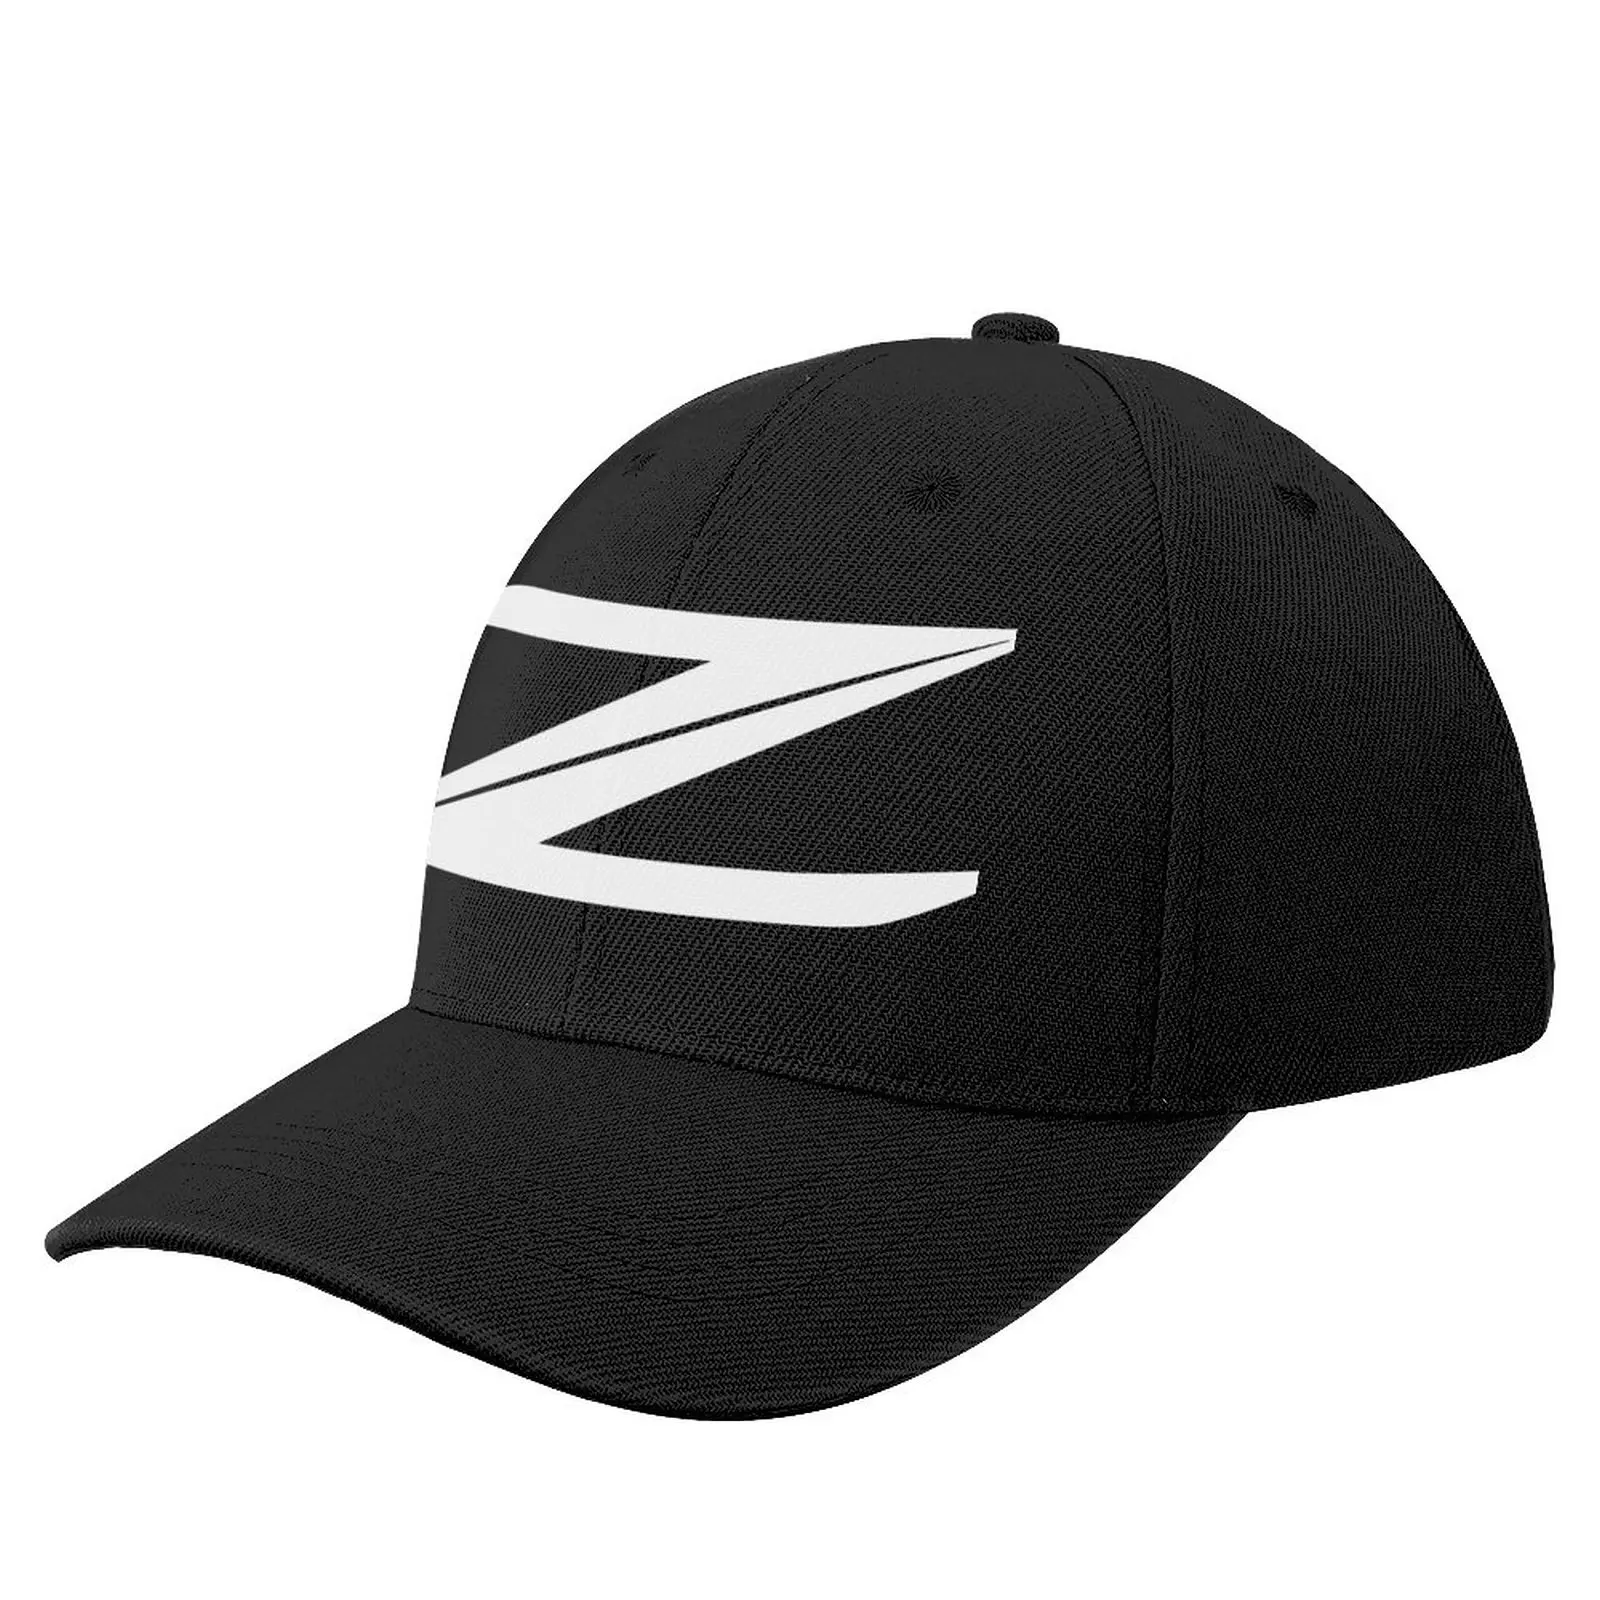 2021 summer new solid color embroidery high quality hat ladies hat brand hat unisex casual sunshade baseball cap 370Z Baseball Cap Golf Hat Man black Hat Ladies Men's